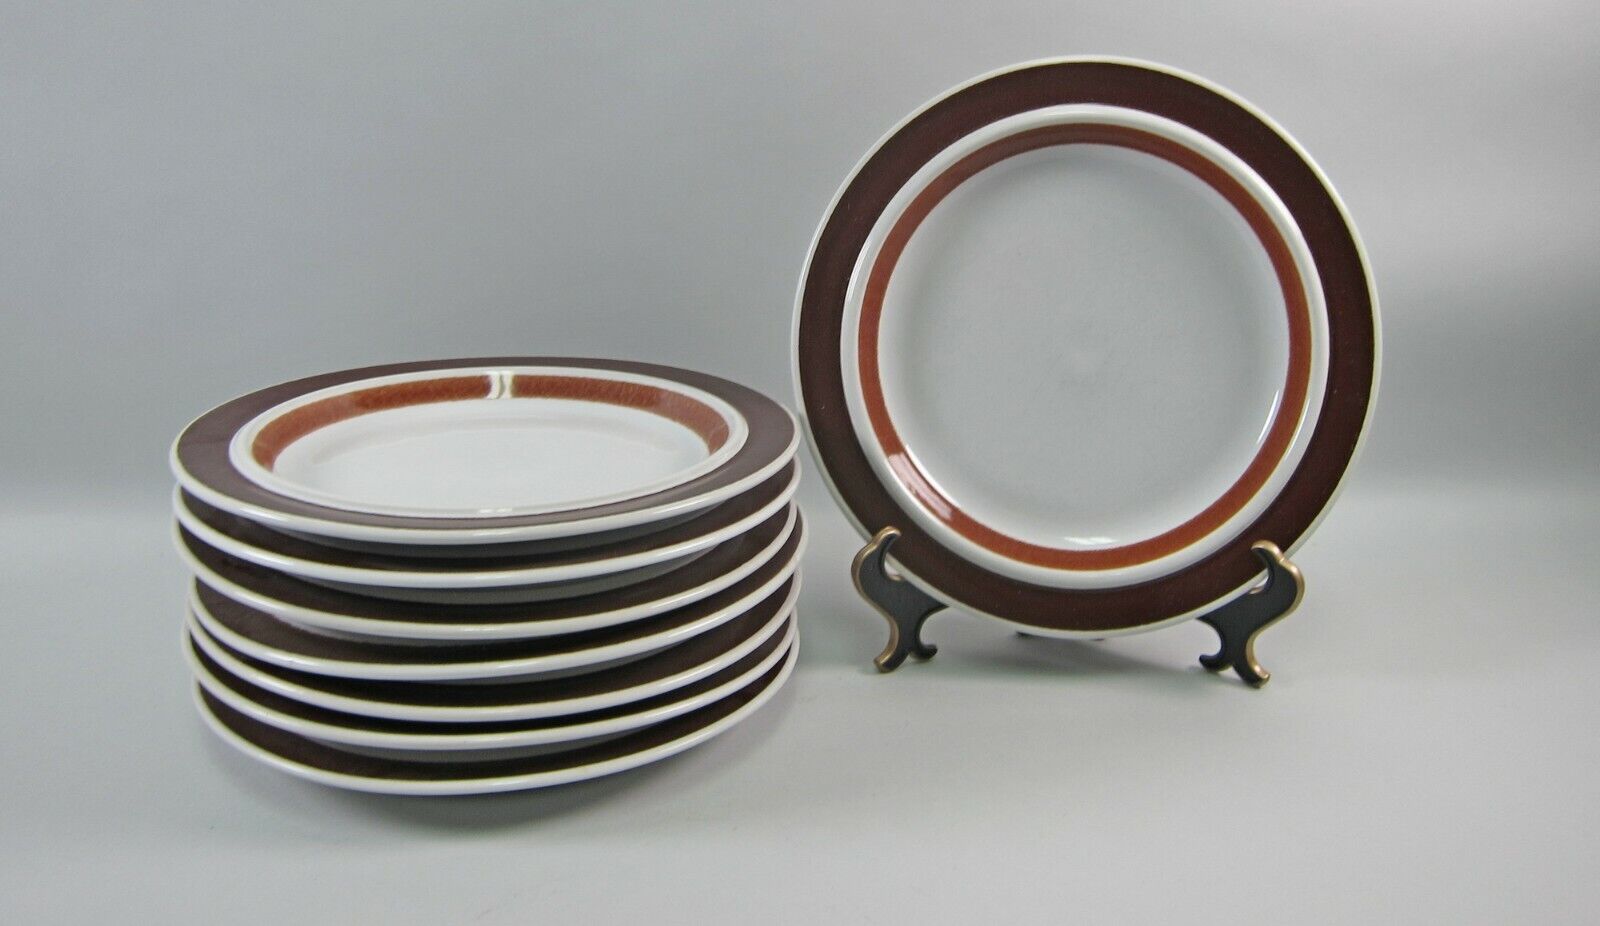 Read more about the article Lot of 8 Arabia of Finland ROSMARIN BROWN Dinner Plates